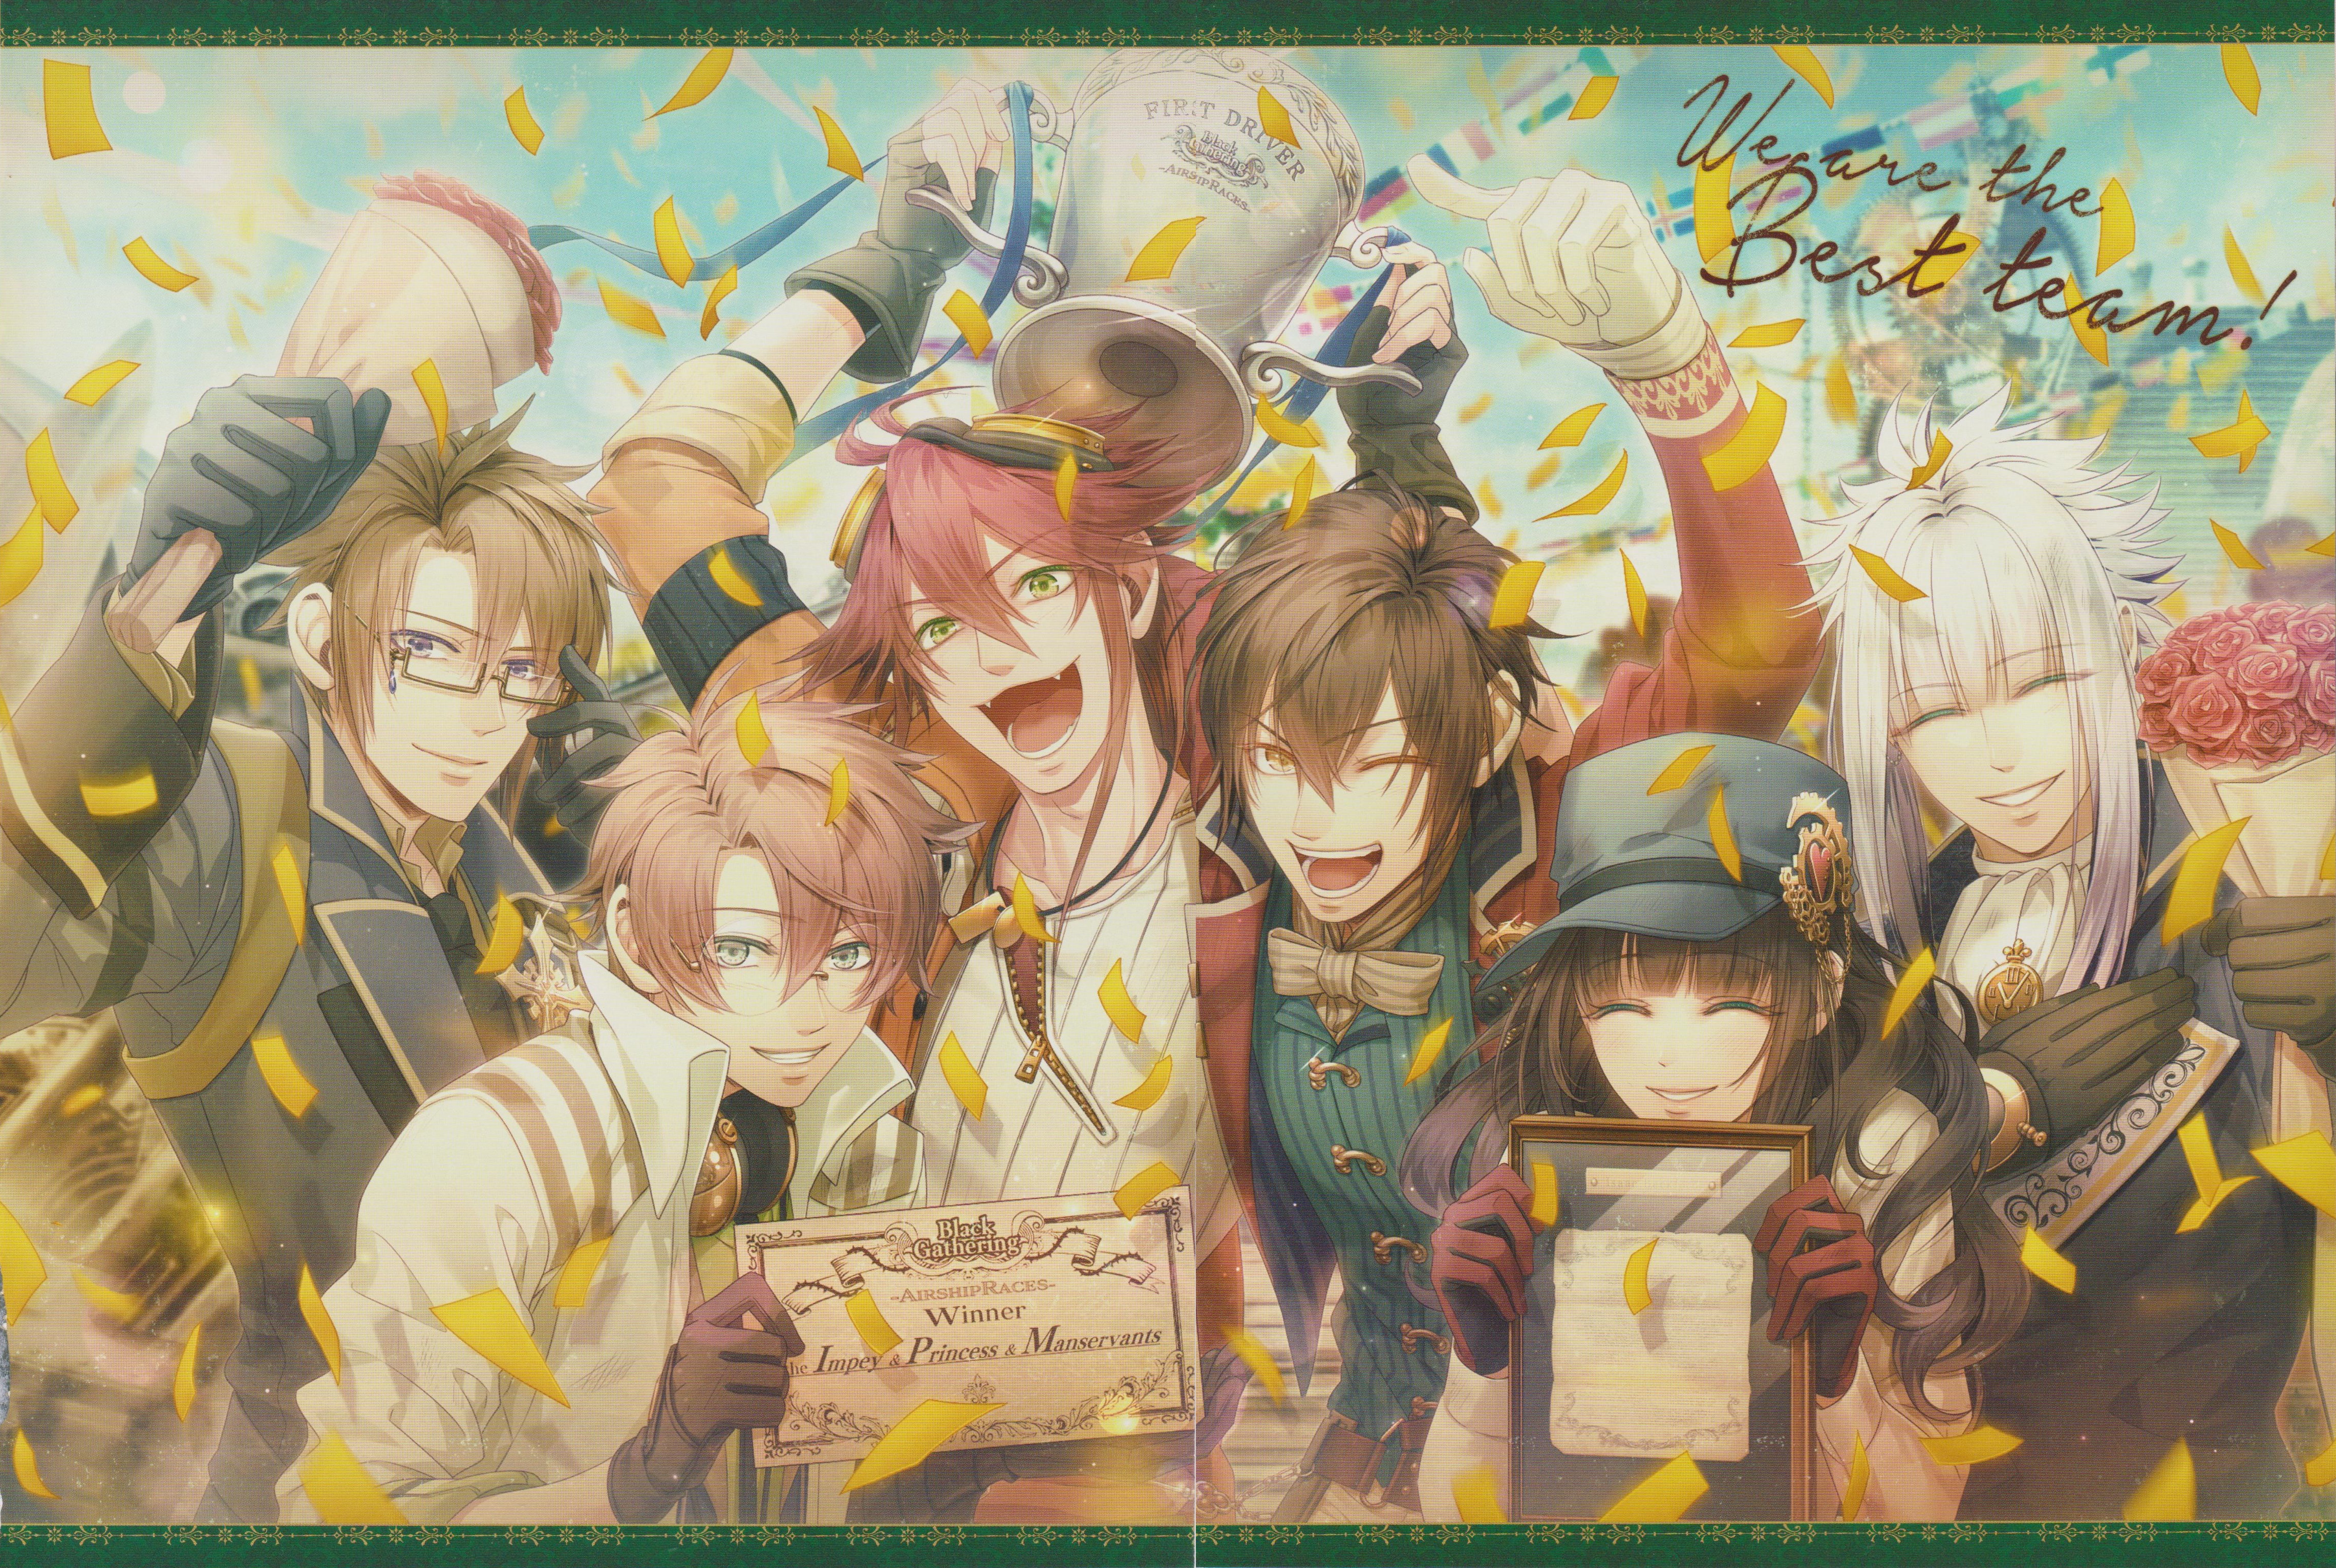 Video Game Code: Realize 4k Ultra HD Wallpaper by miko